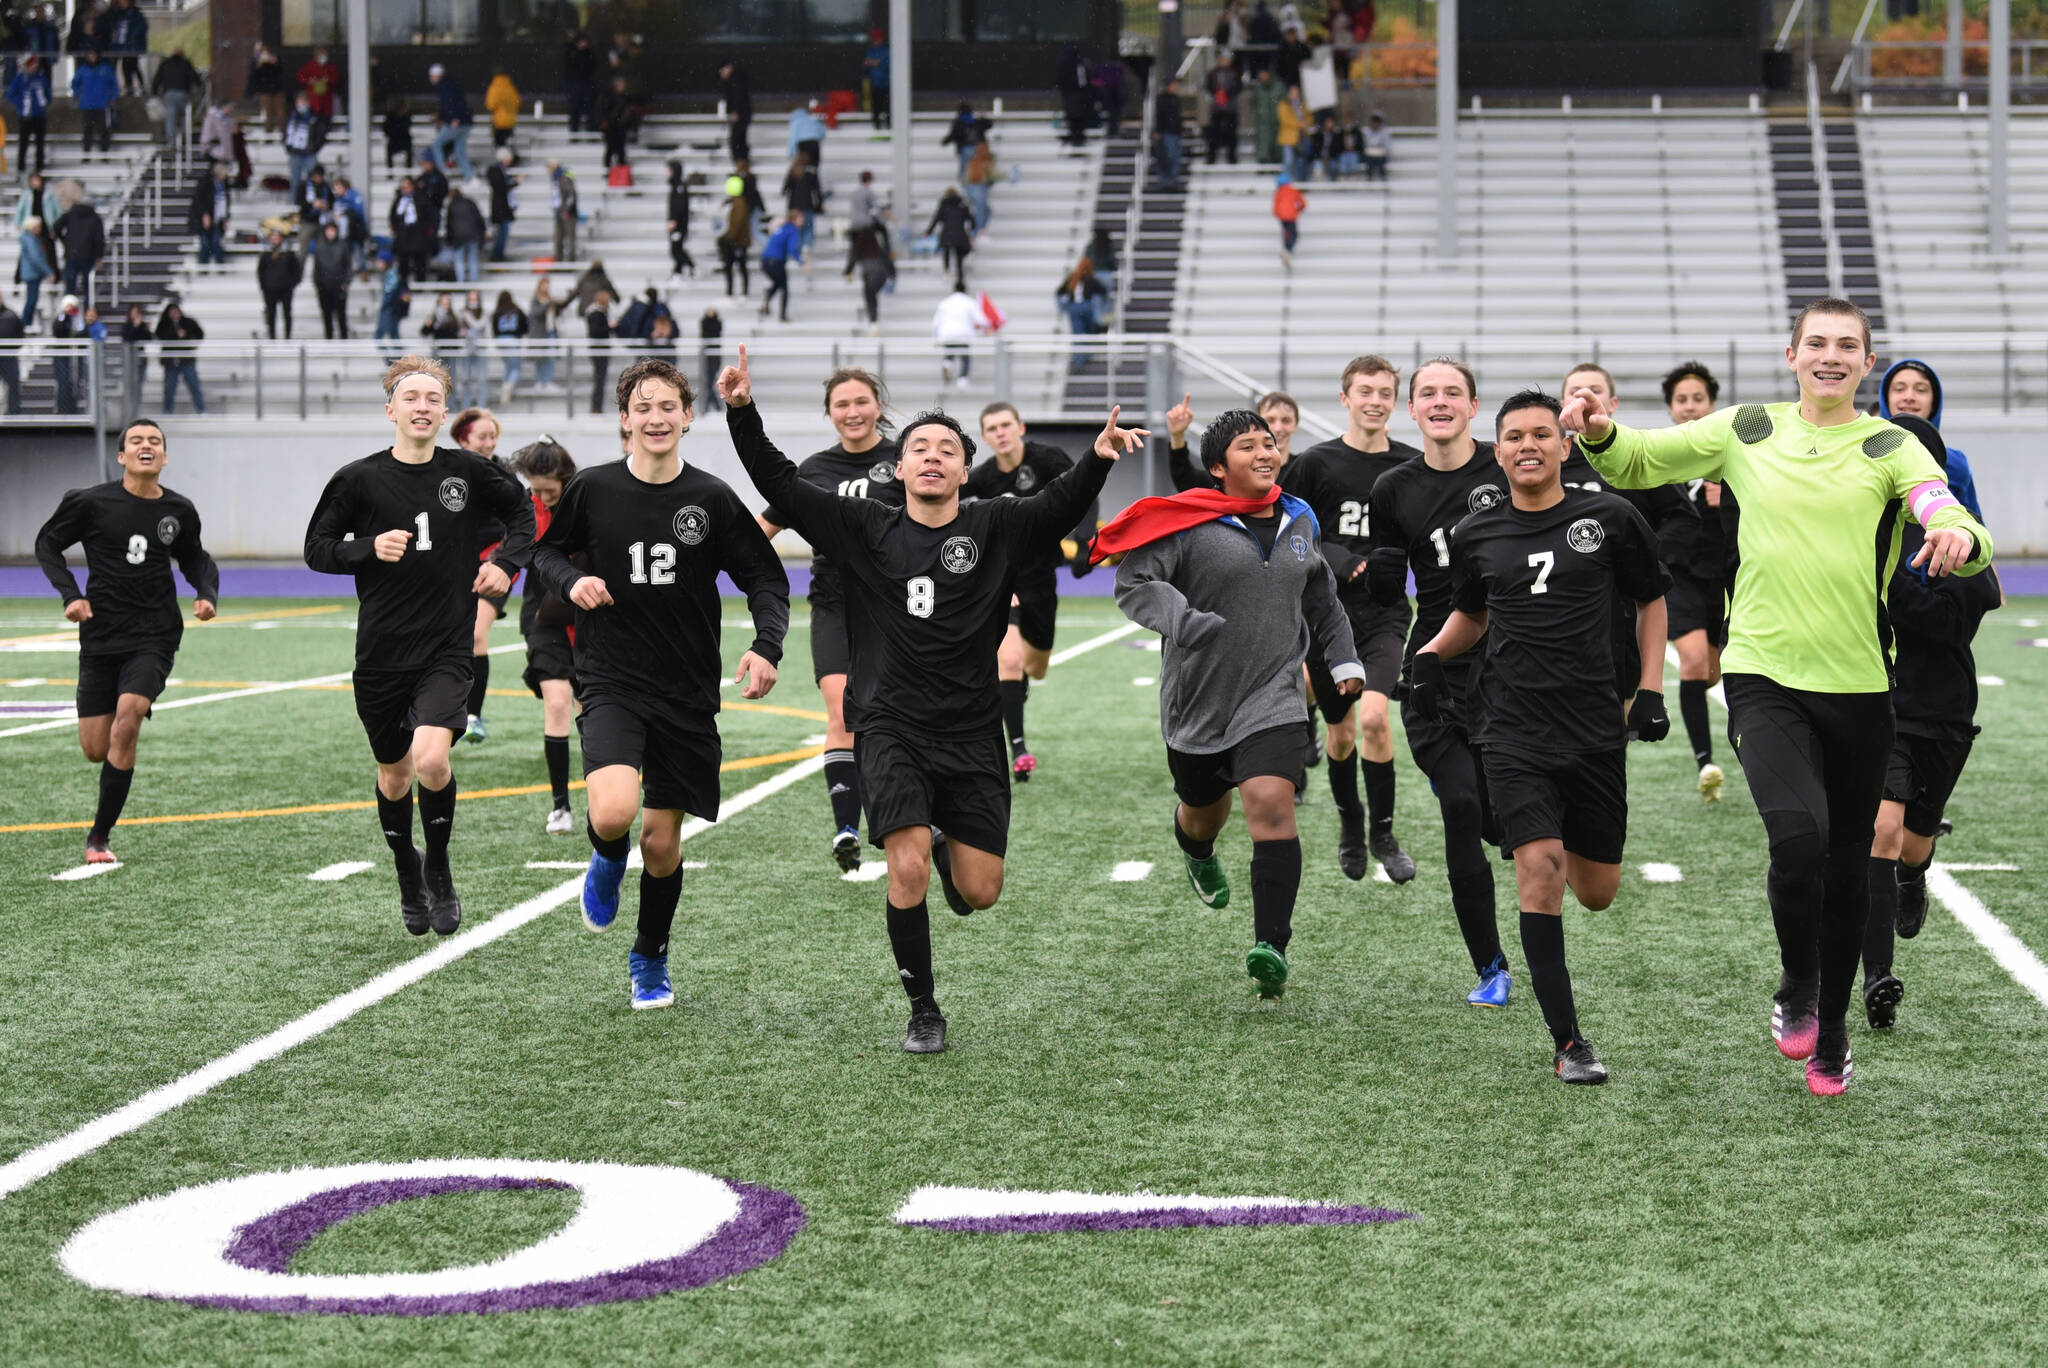 Chris Sutton
As has become tradition for the Orcas team over the years, each win is followed by a big salute and gratitude for all the fans in attendance at each of their games. This is especially appreciated at the State Playoffs where no team has a home field advantage.